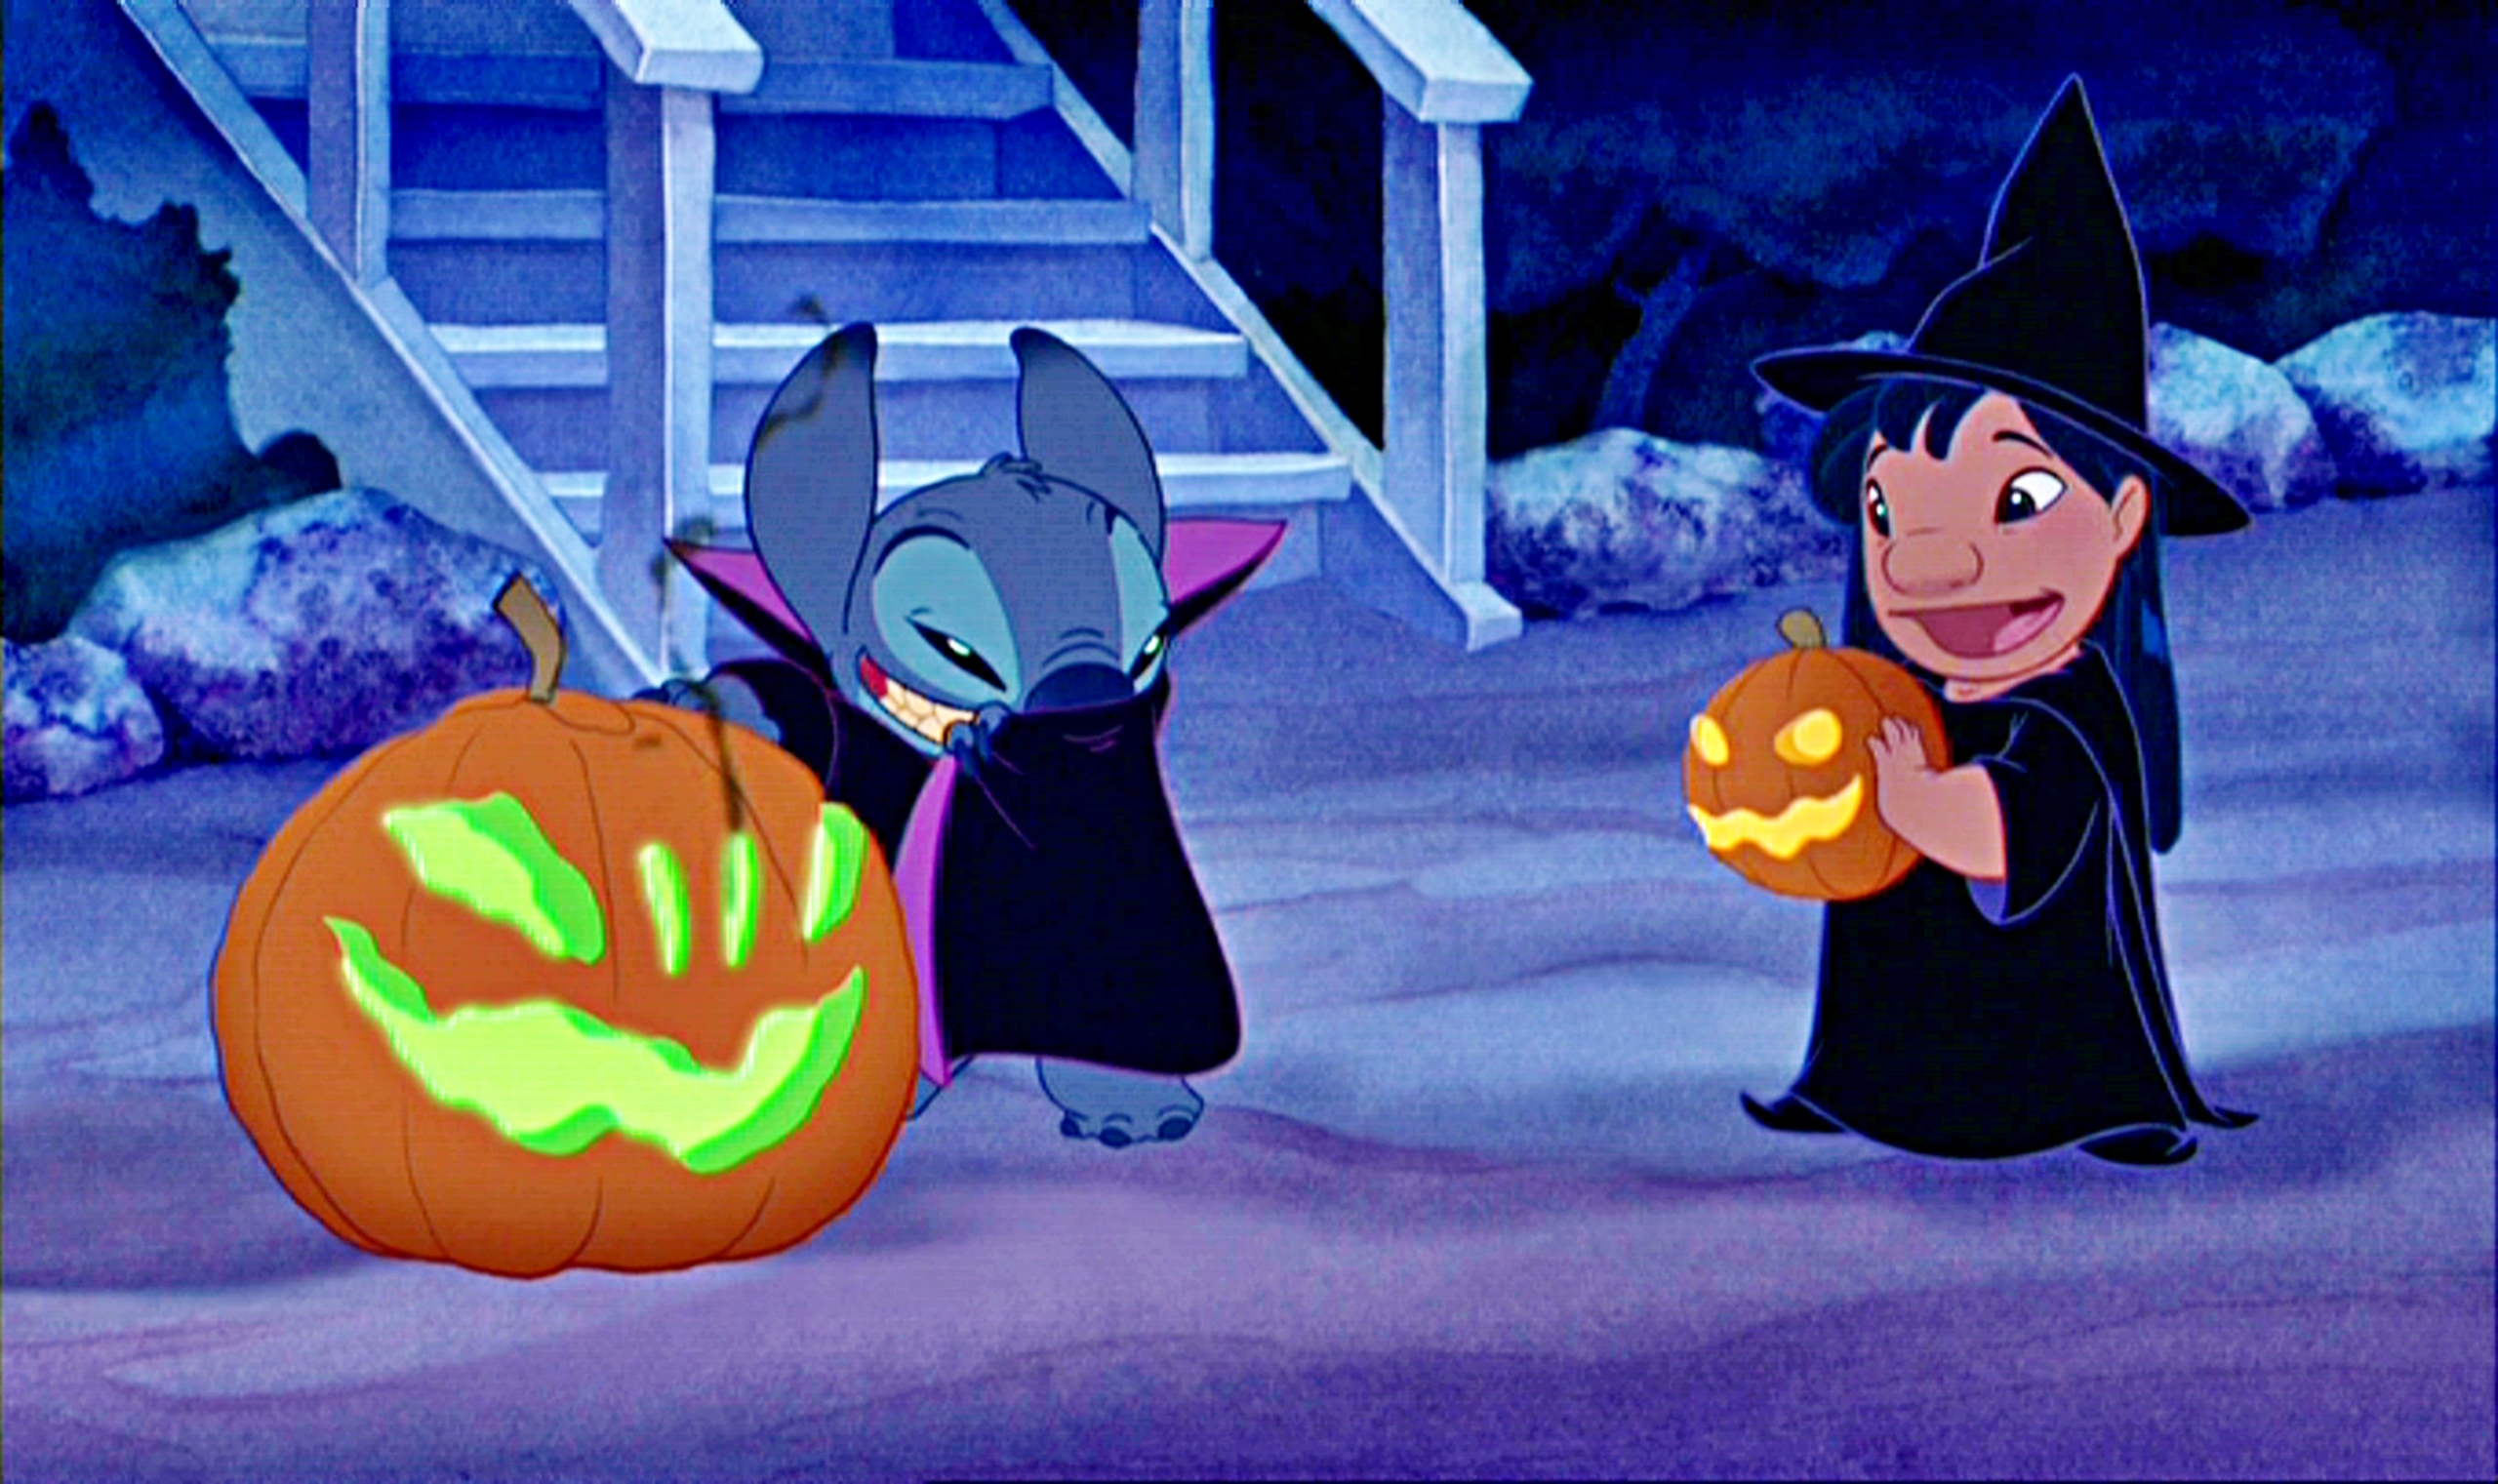 Download Celebrate Halloween with Lilo and Stitch Wallpaper  Wallpapers com